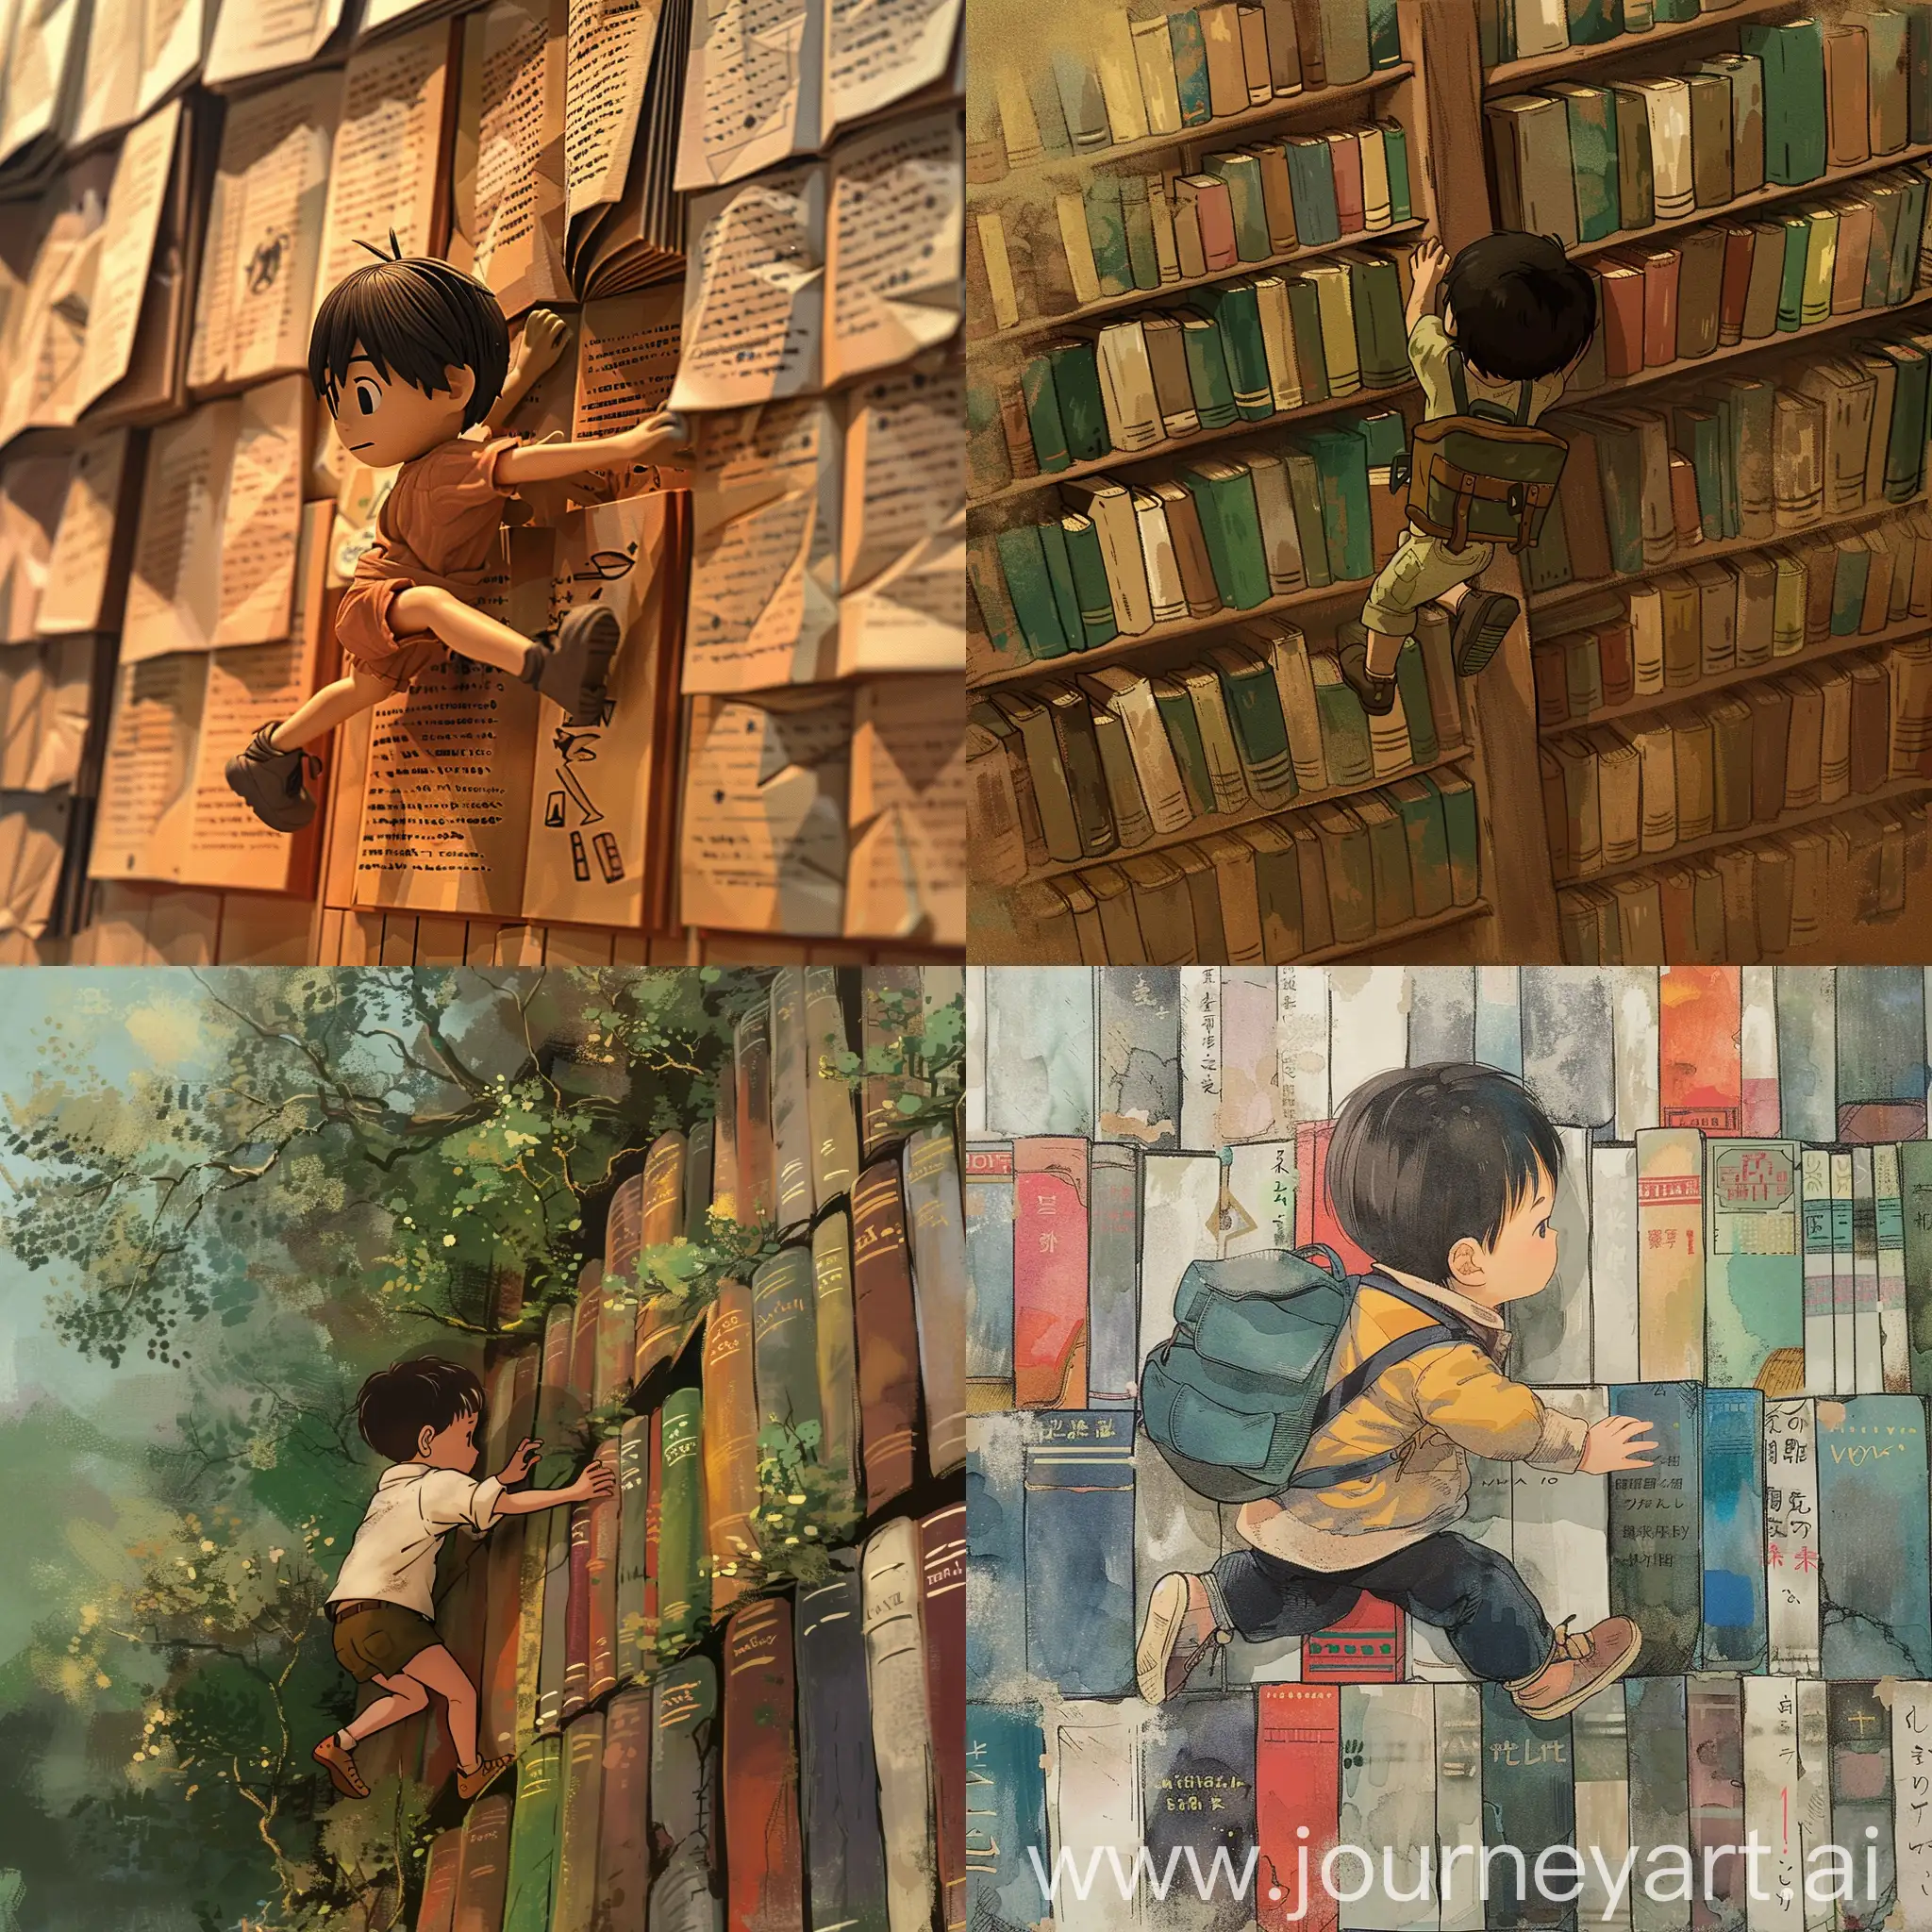 child climbing a wall of book in the style of miyazaki